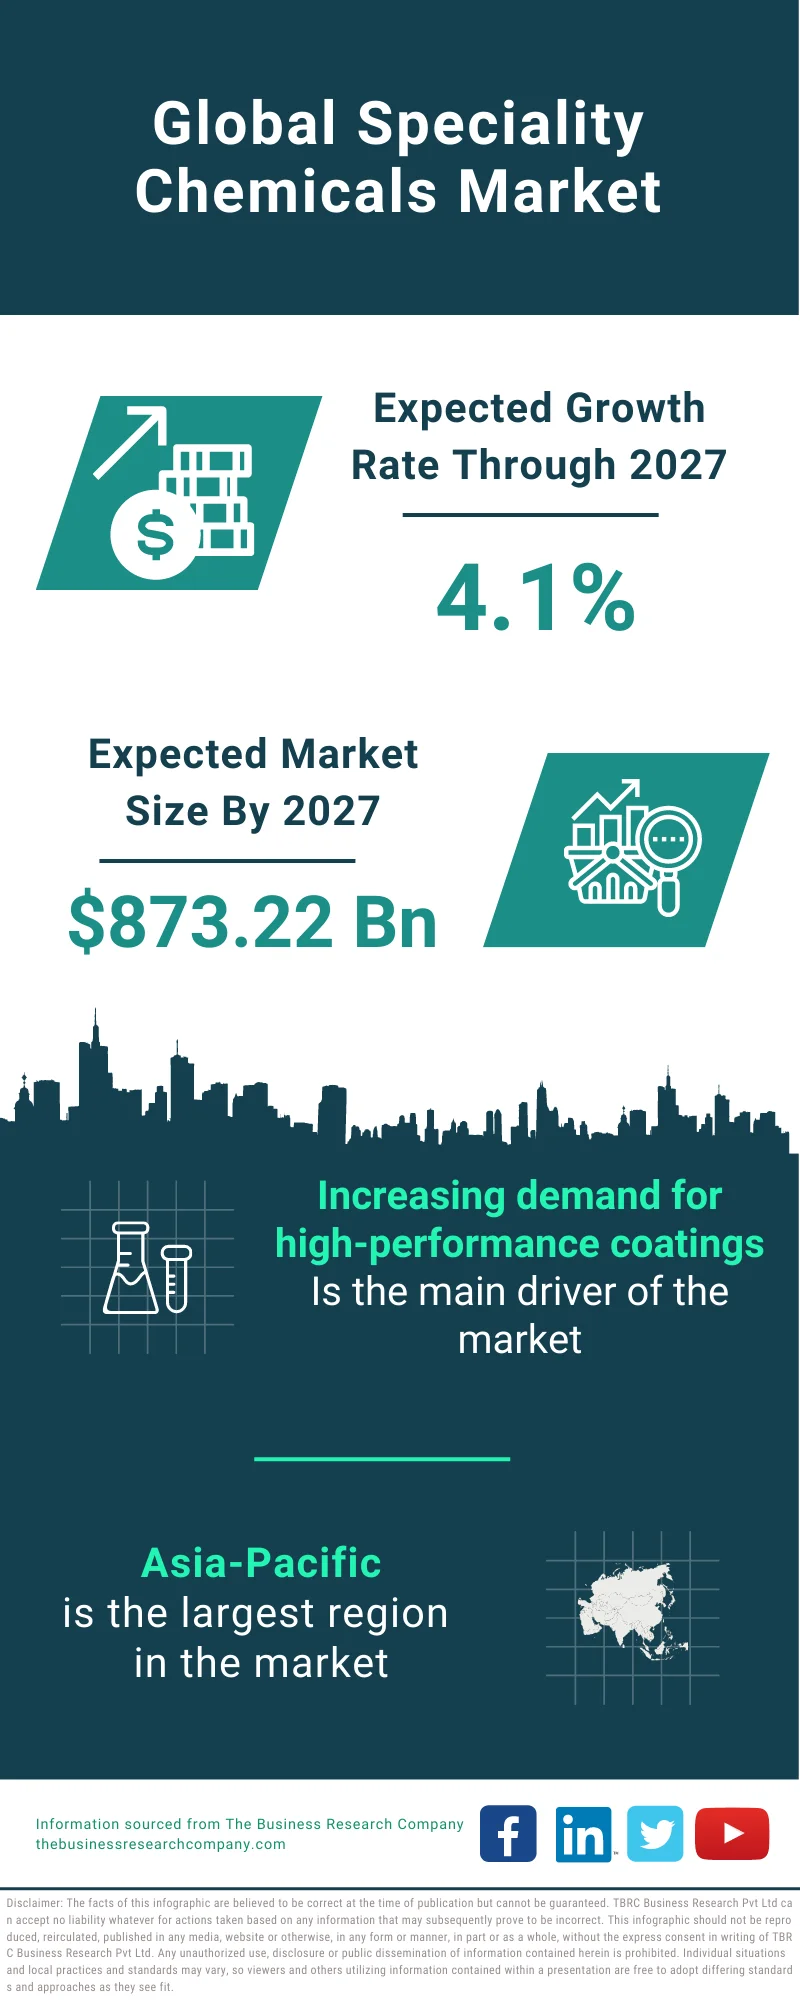 Speciality Chemicals Market